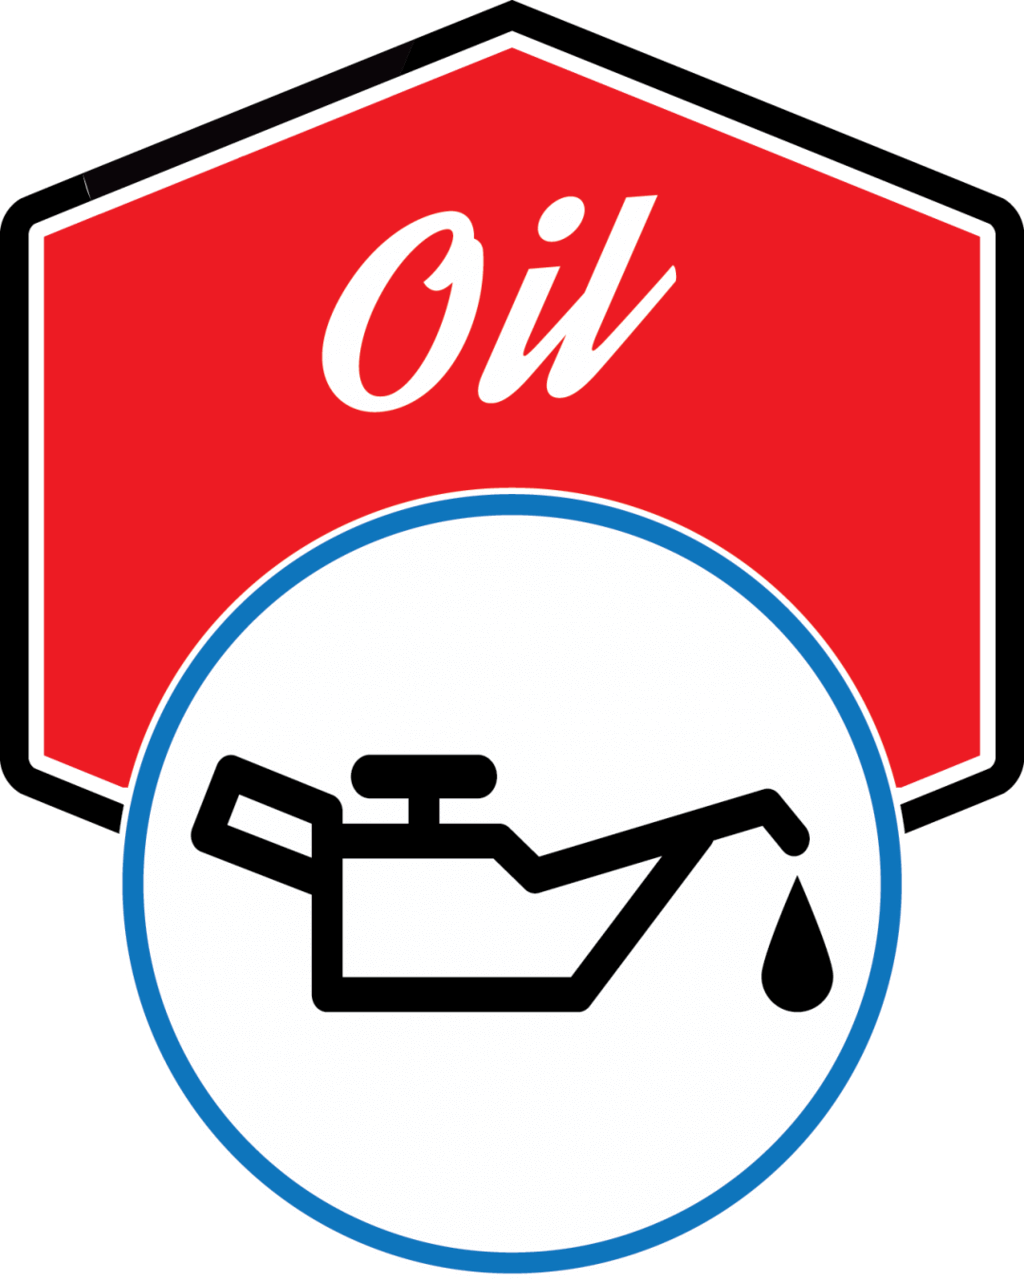 Oil Change Clipart Wwwpixsharkcom Images Galleries - Dashboard Symbols And Meanings (1024x1280)